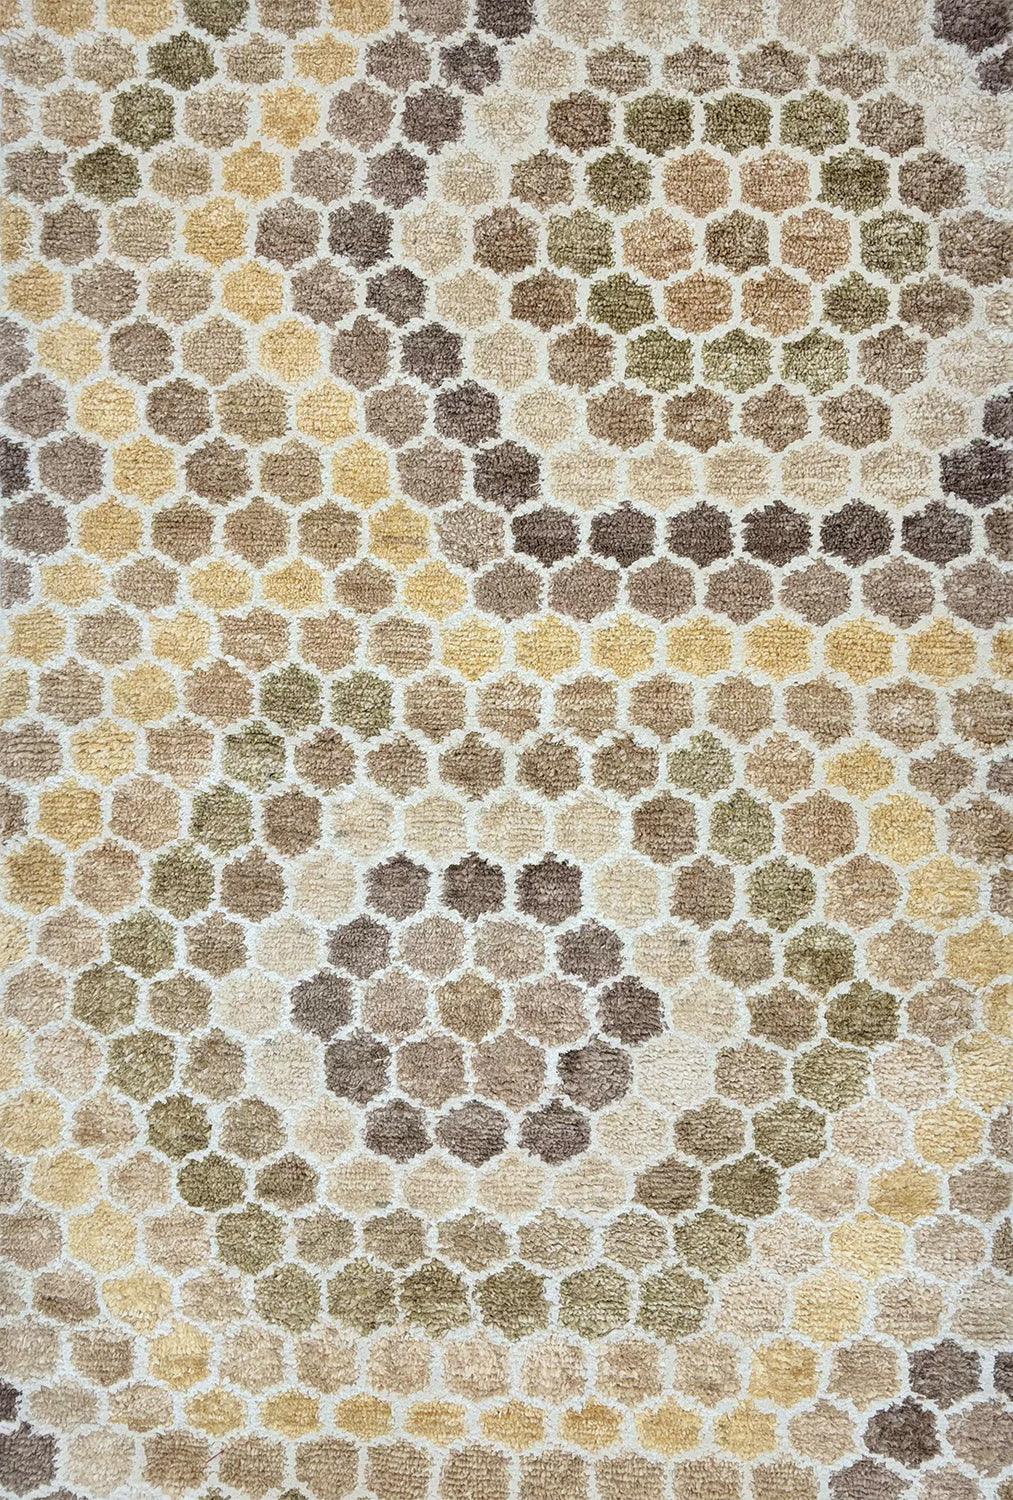 Detail of a handknotted rug with a classic hexagon pattern in shades of tan, yellow, white and oatmeal. 